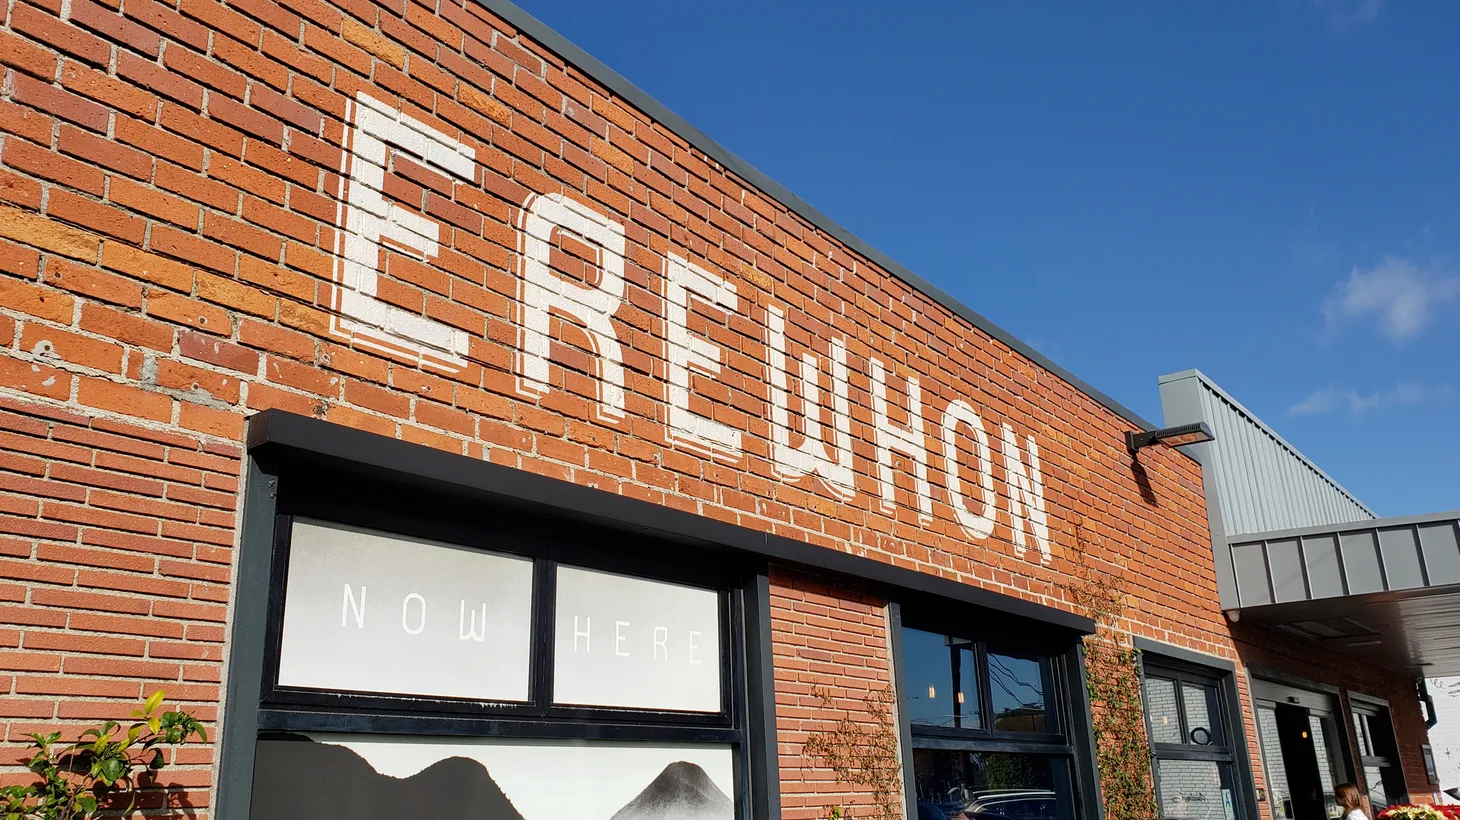 A store front sign for the upscale organic grocery store chain known as Erewhon, in Venice Beach, CA.